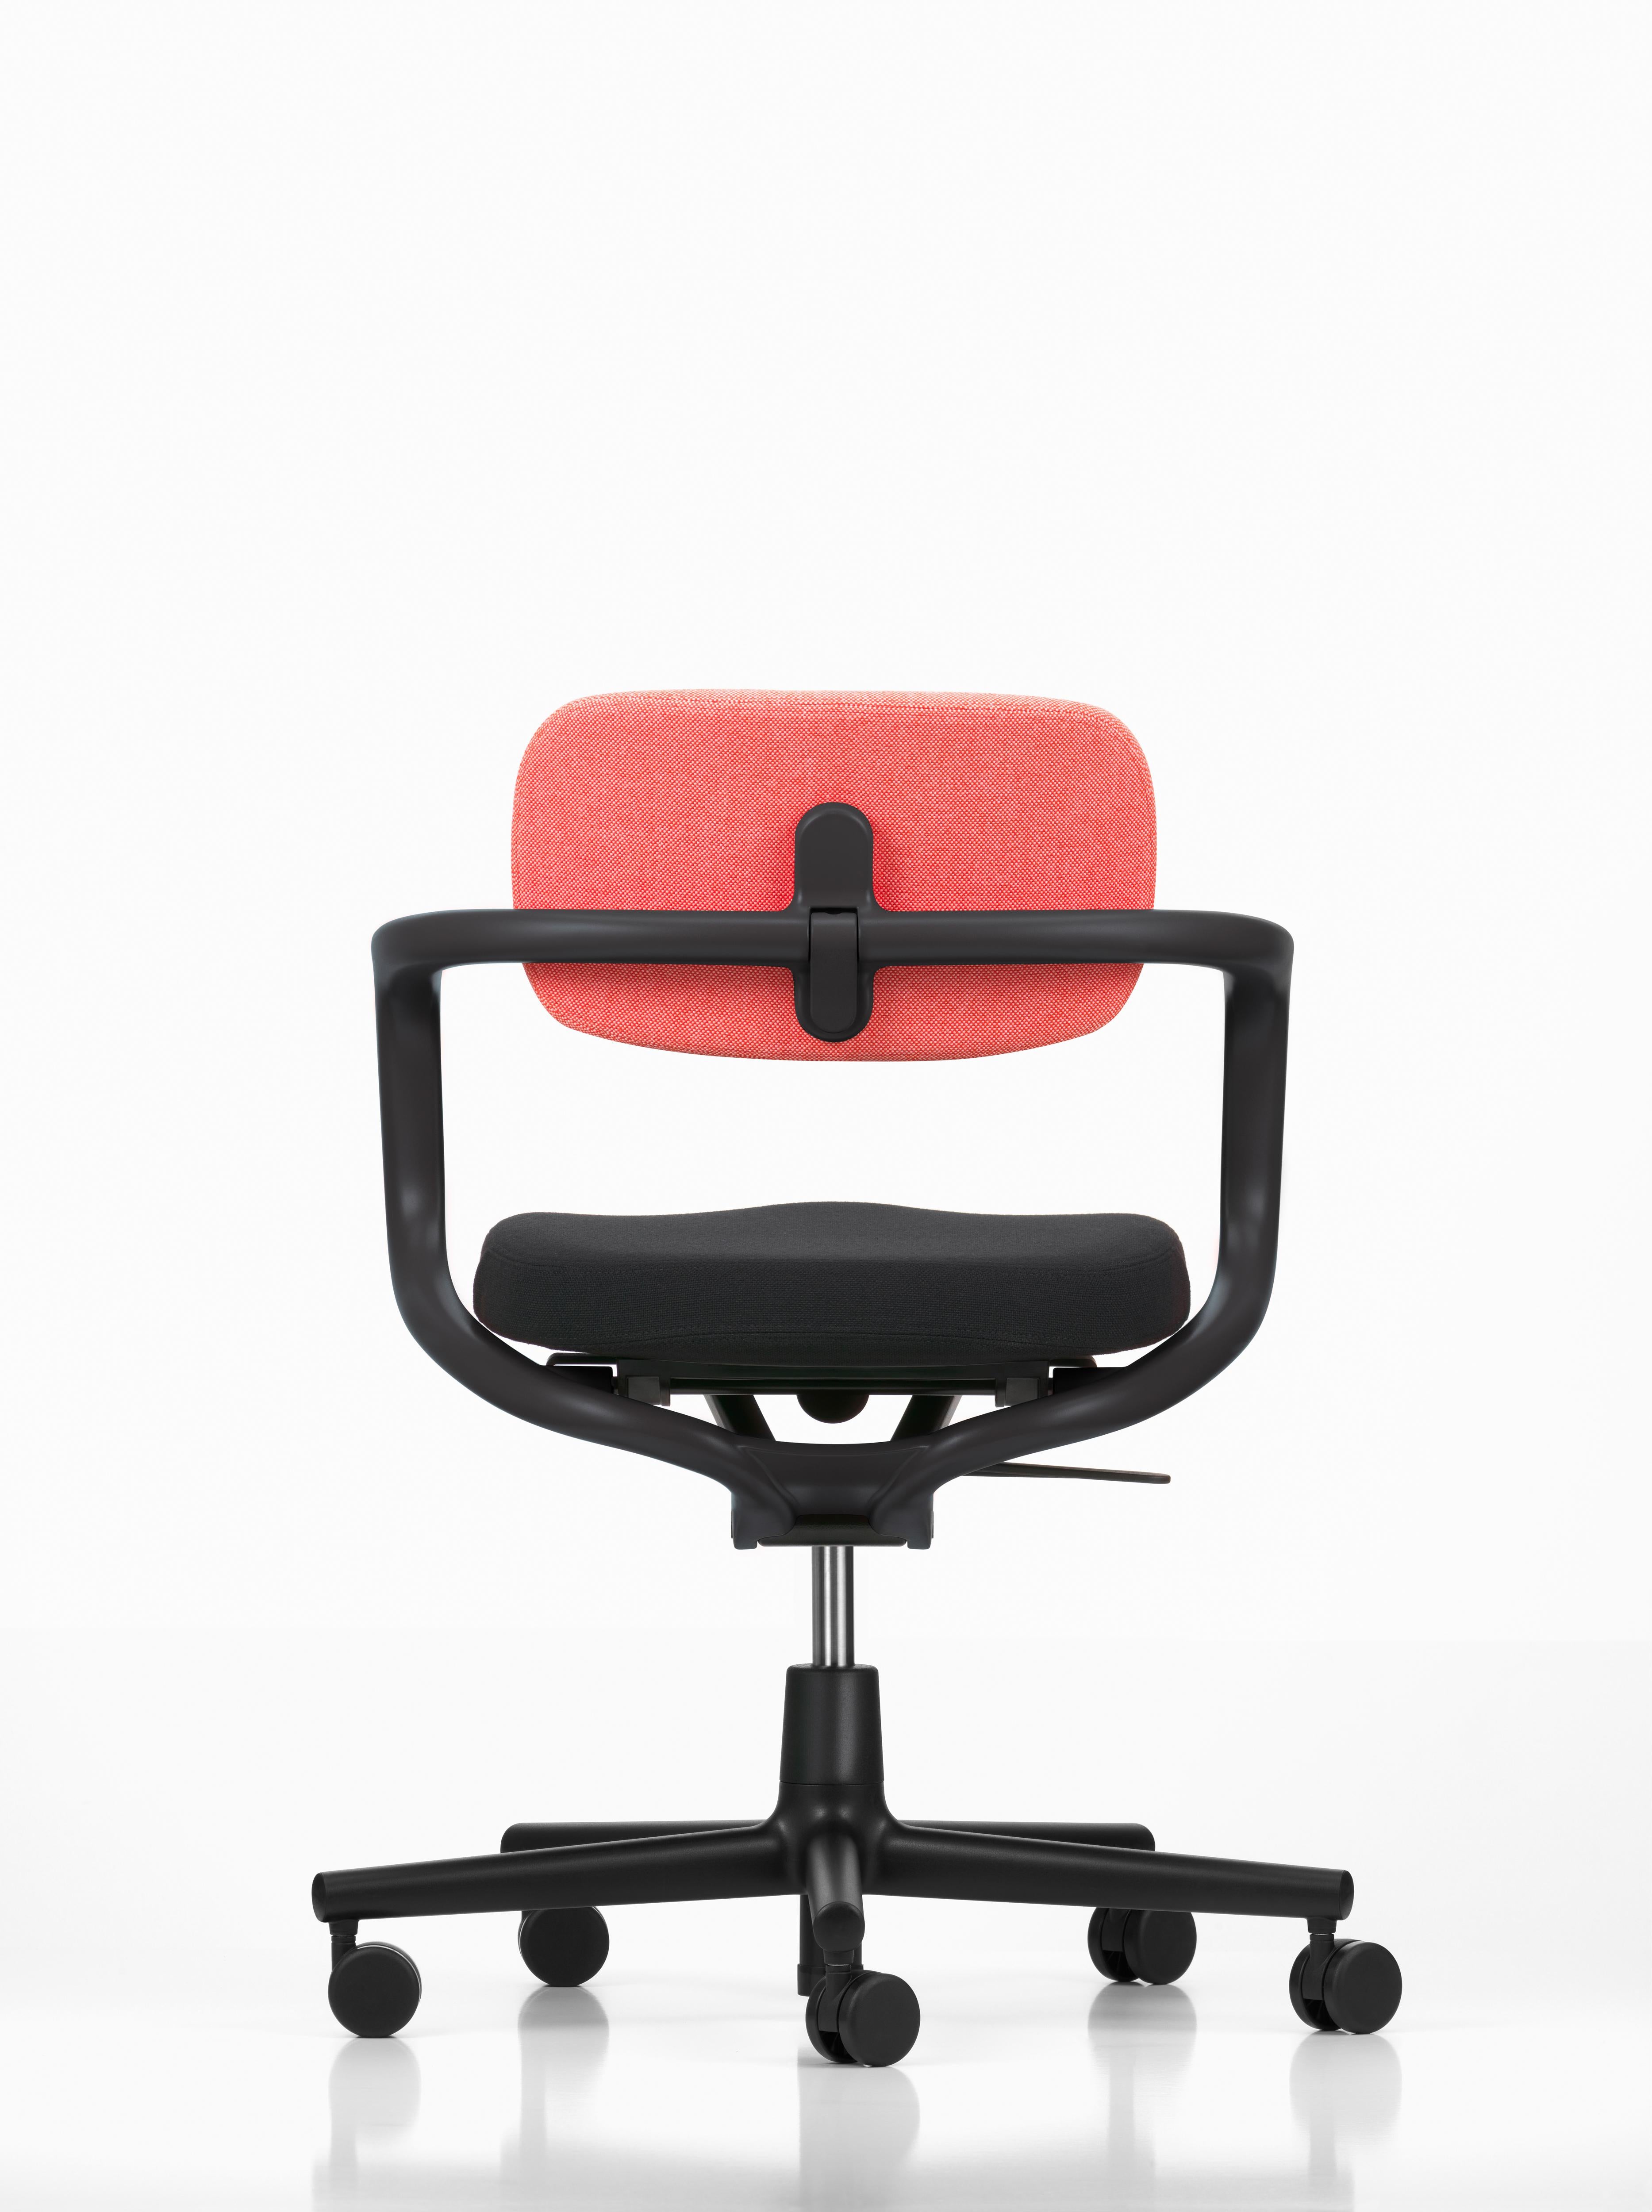 Swiss Vitra Allstar Chair in Poppy Red & Ivory and Nero Hopsak by Konstantin Grcic For Sale